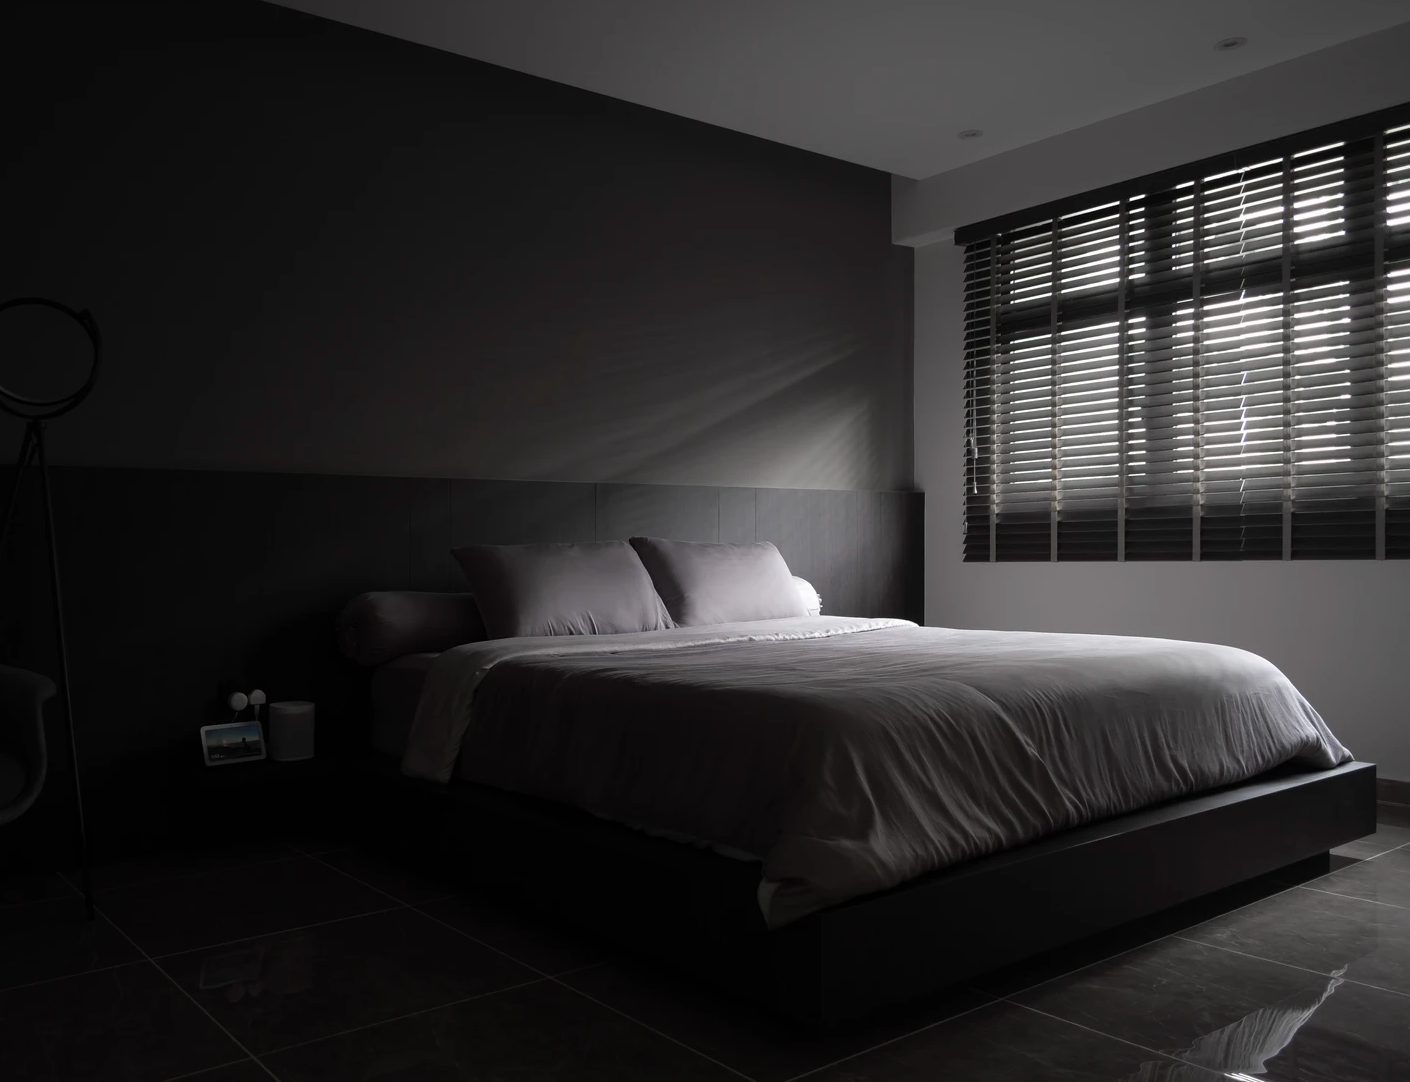 Minimalist bedroom with a sleek bed frame with light and dark colour palette